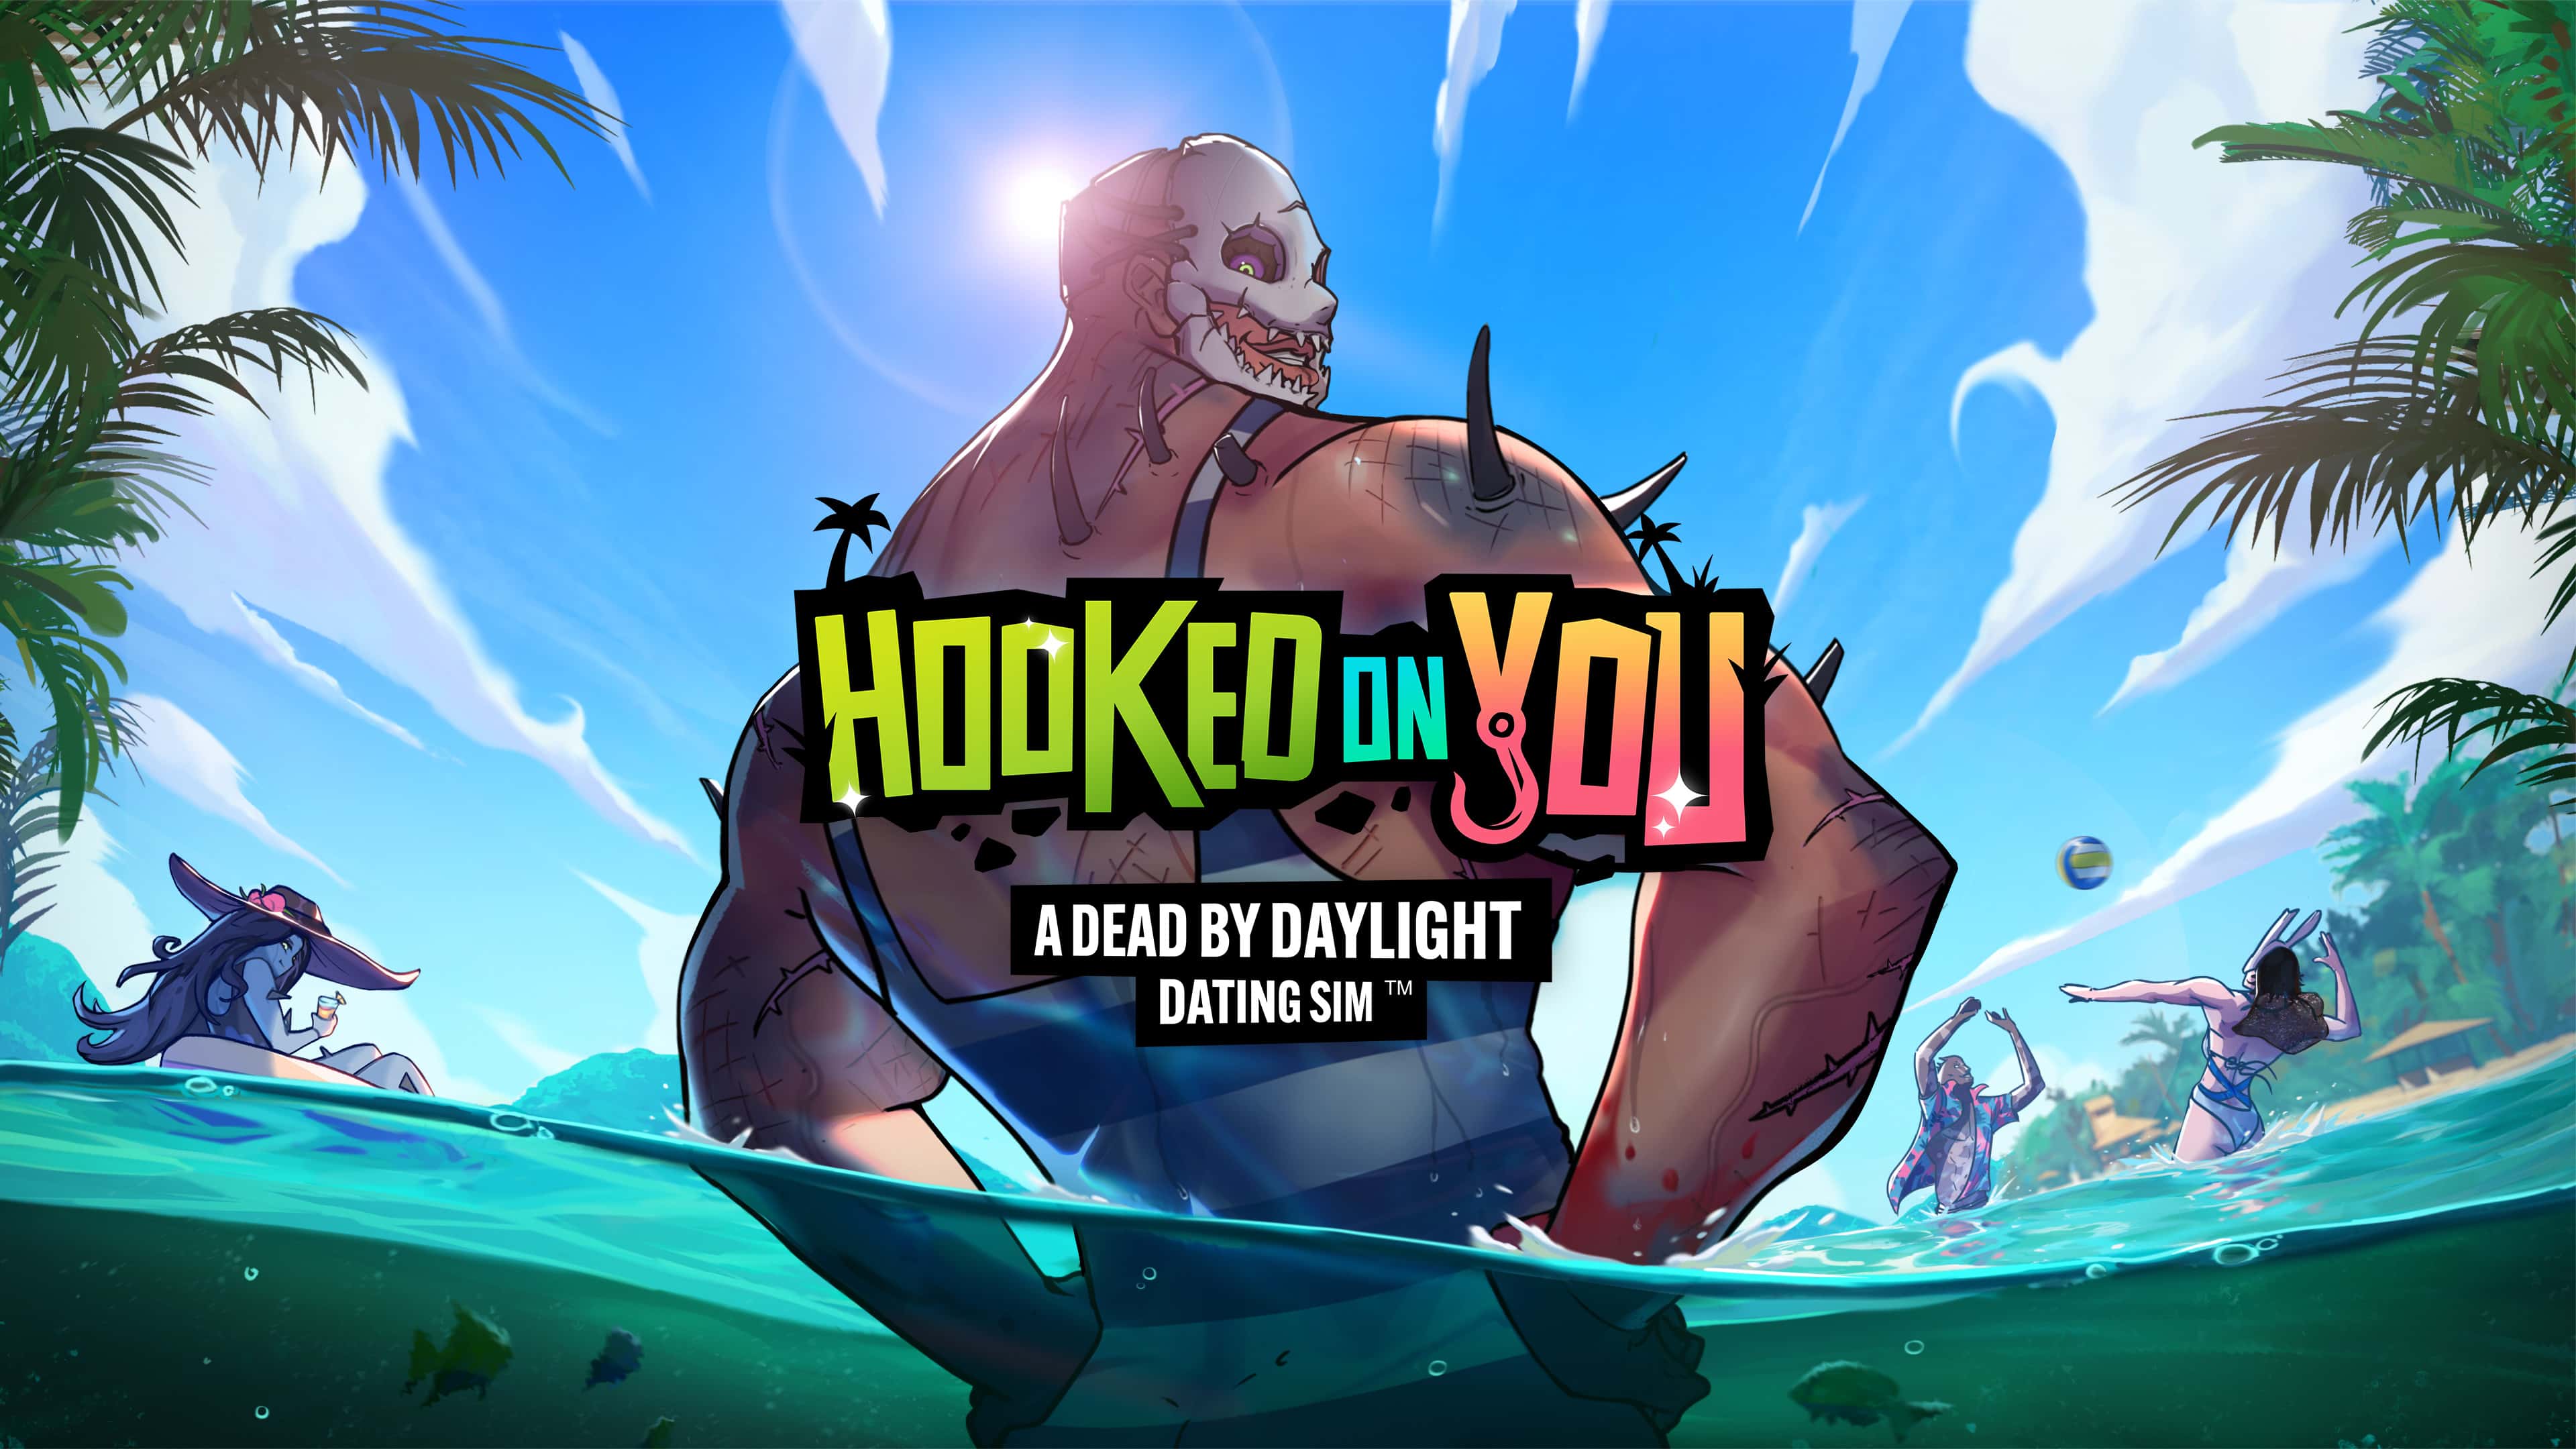 Hooked on gay game